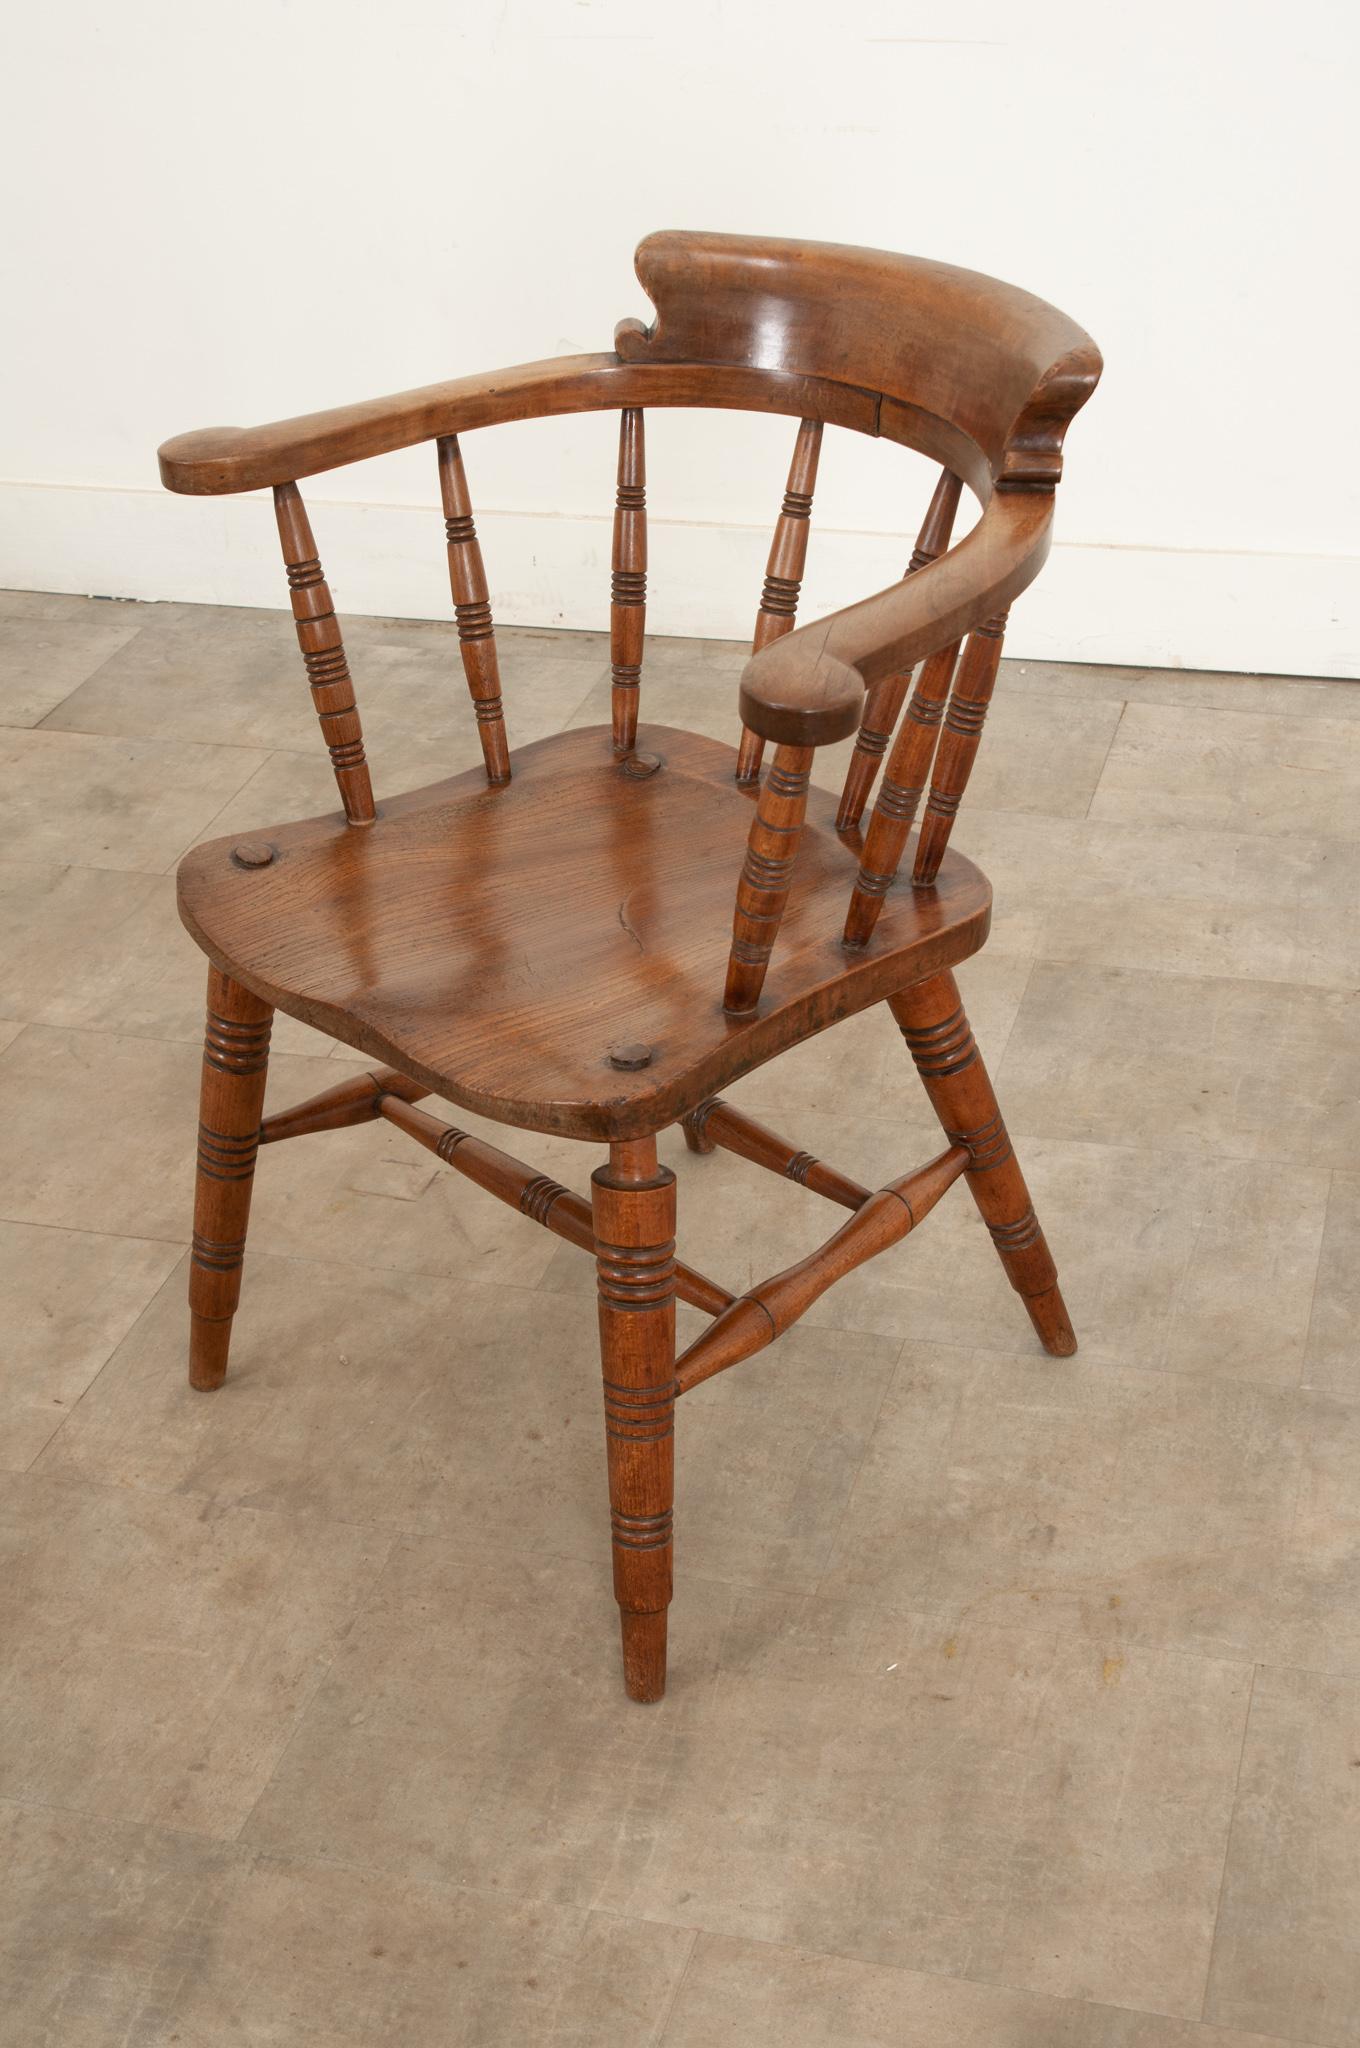 This late 19th century Victorian smokers bow arm chair dates from circa 1880 and is constructed of solid oak. It has a curved back with shaped arms, turned and hand-carved spindle upright supports and a figured shaped seat. This characterful antique